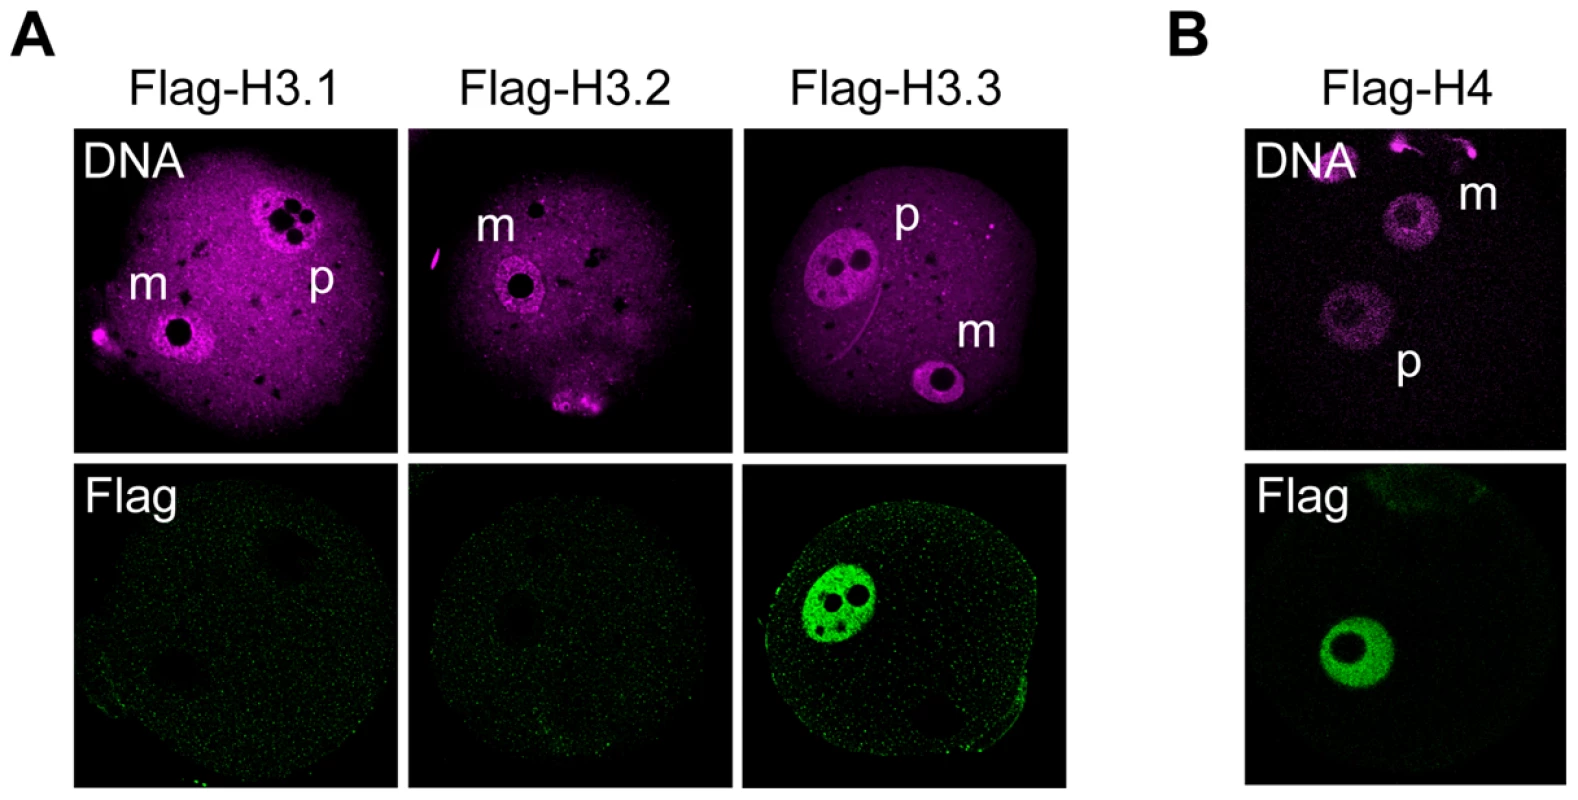 Incorporation of H3 variants and H4 into nuclei at an early stage after fertilization.